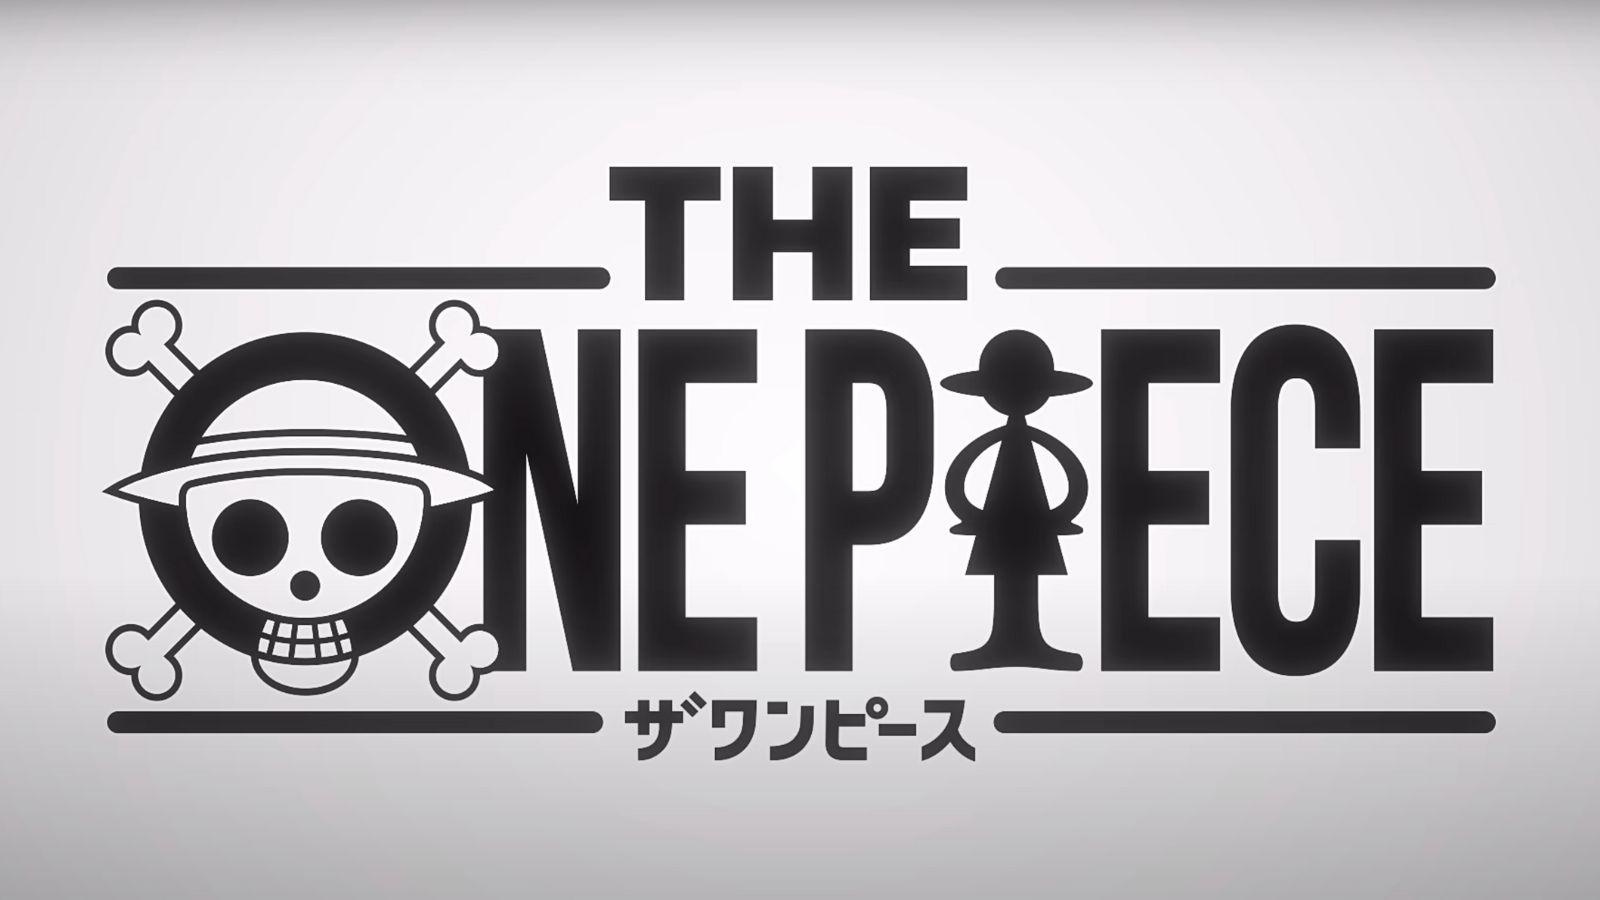 One Piece live-action episode titles, synopses, and spoilers - Dexerto